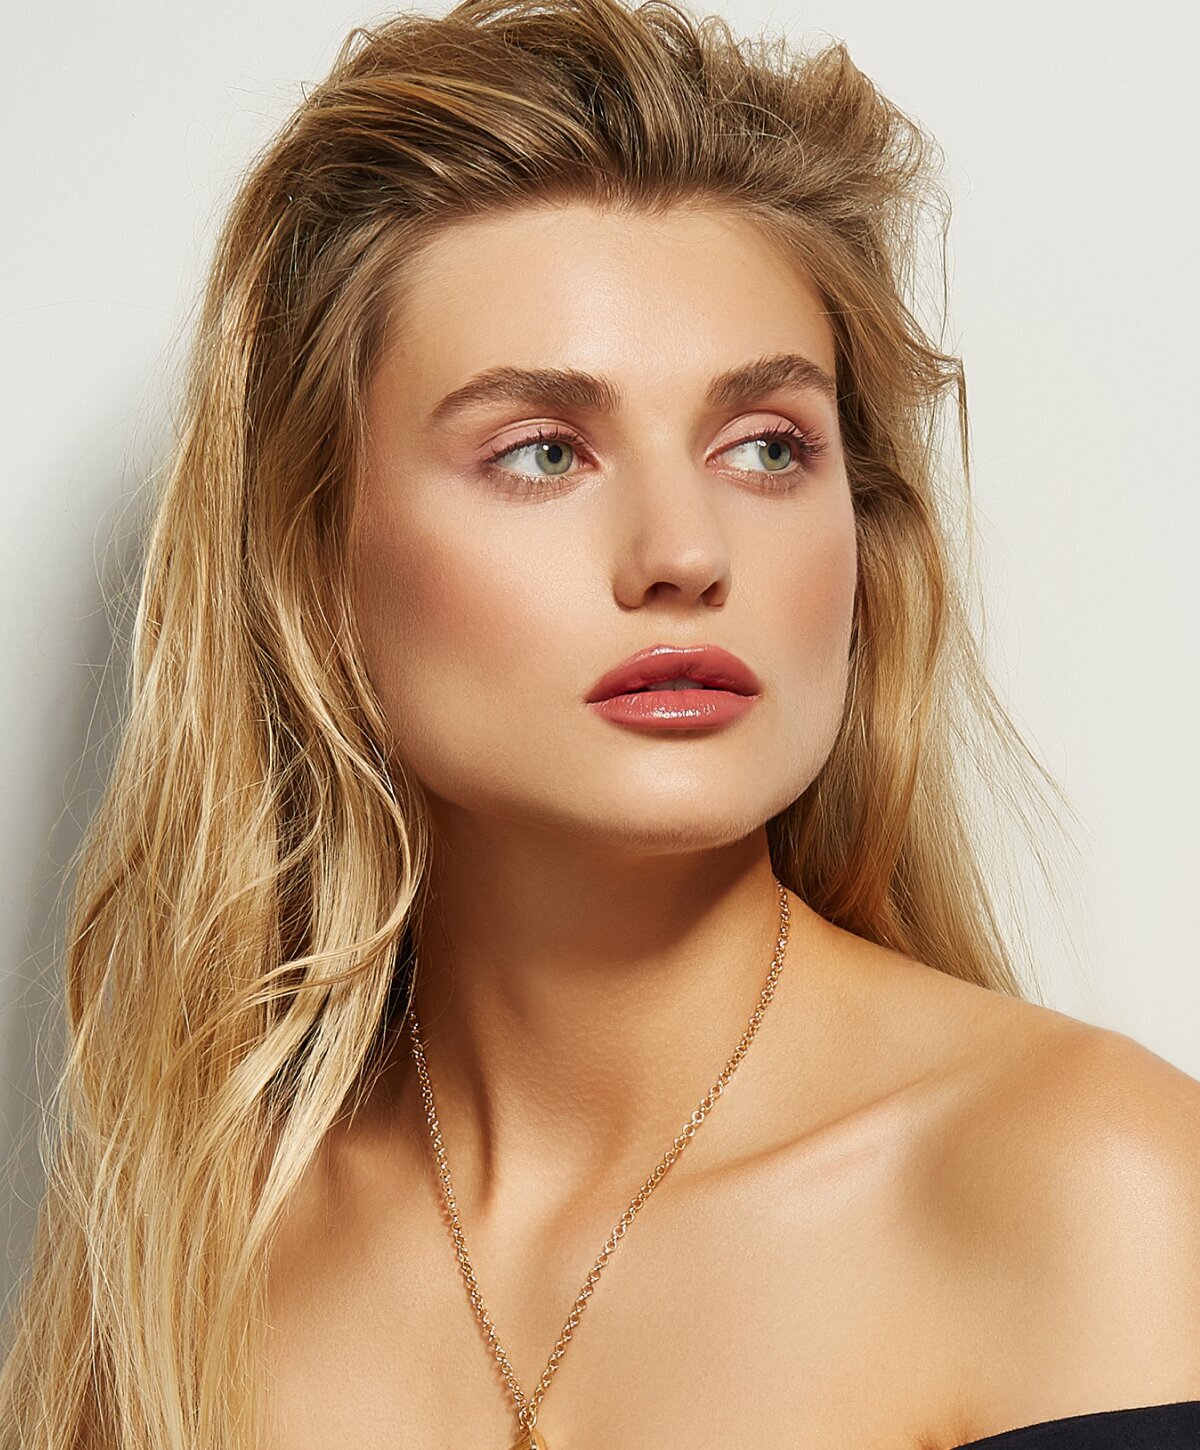 Beverly Hills lip lift model with blonde hair